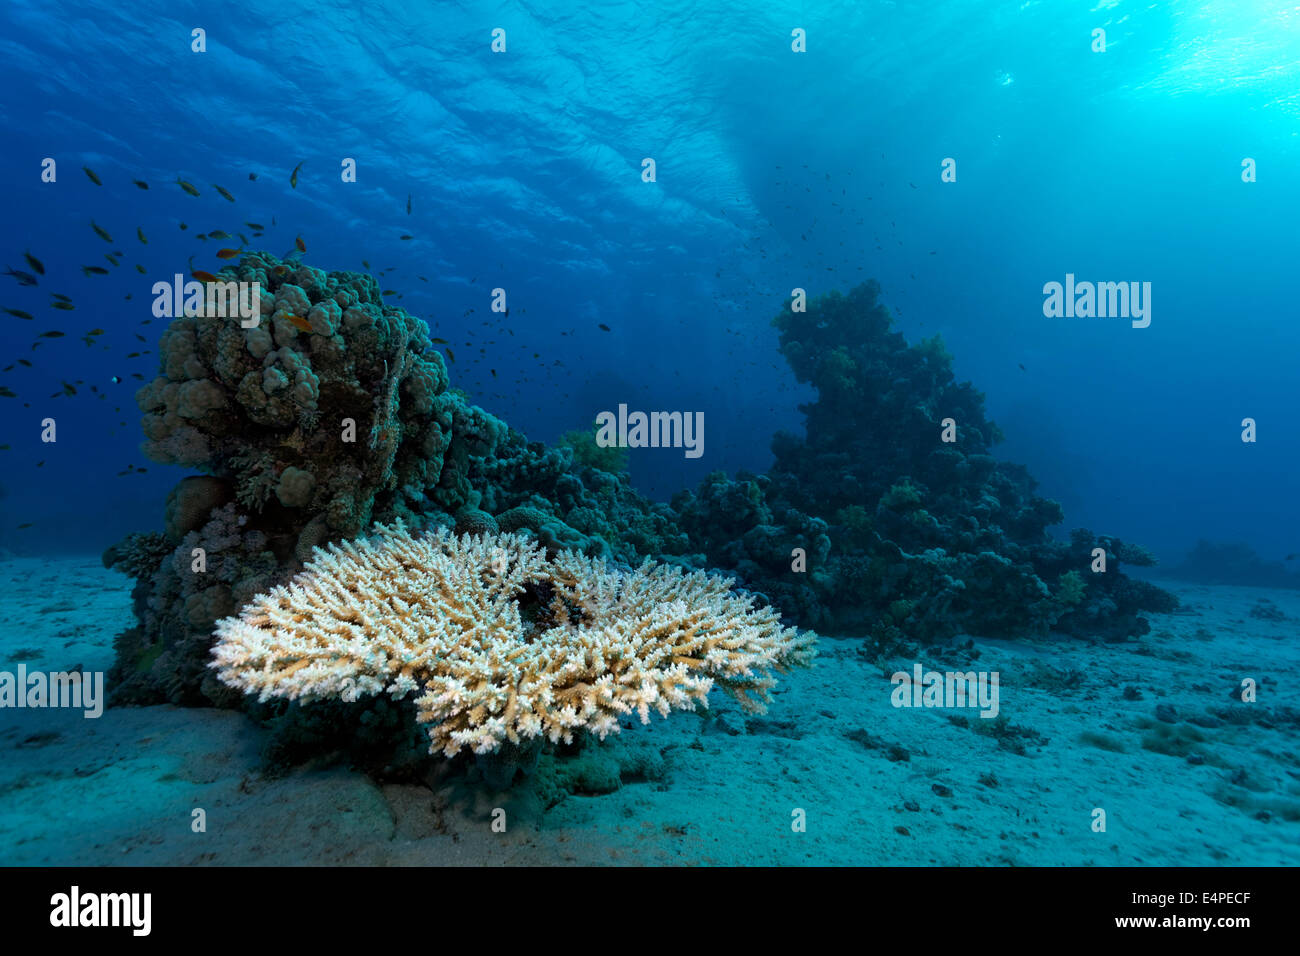 Agropora table coral (Agropora sp.) on small coral reef in the sandy ground, Red Sea, Egypt Stock Photo